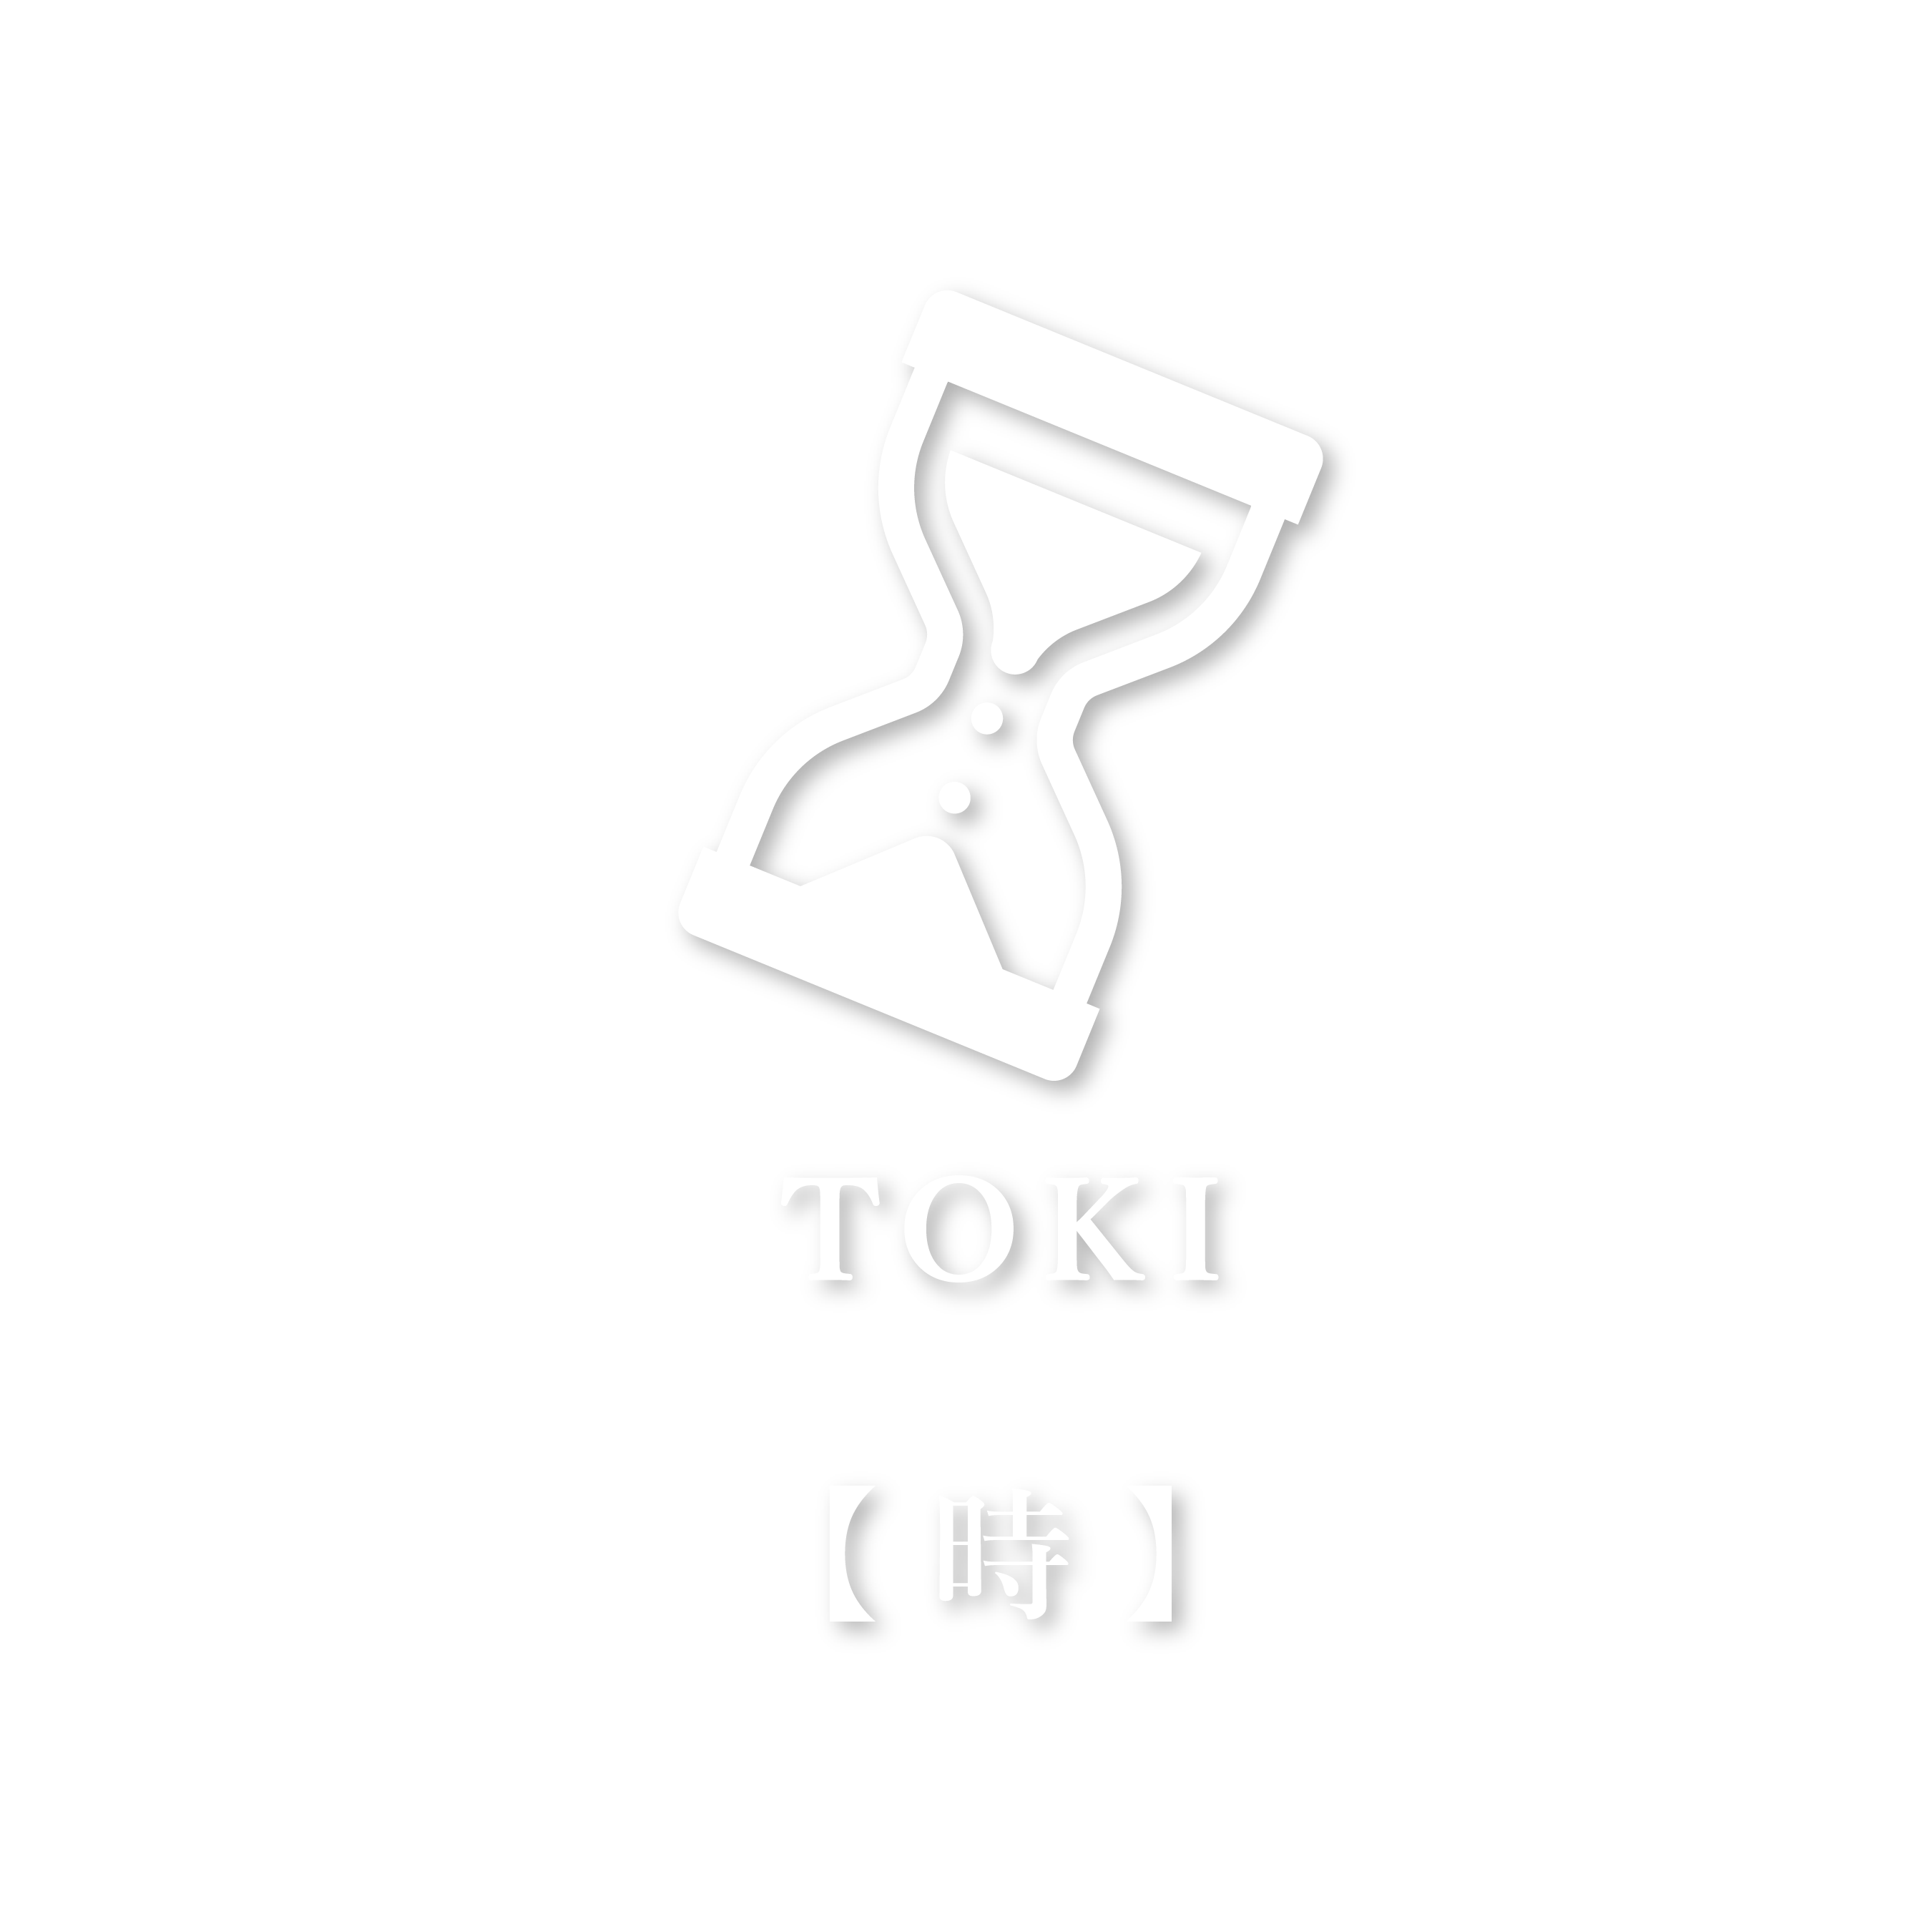 Click here for details of guest room building "TOKI".